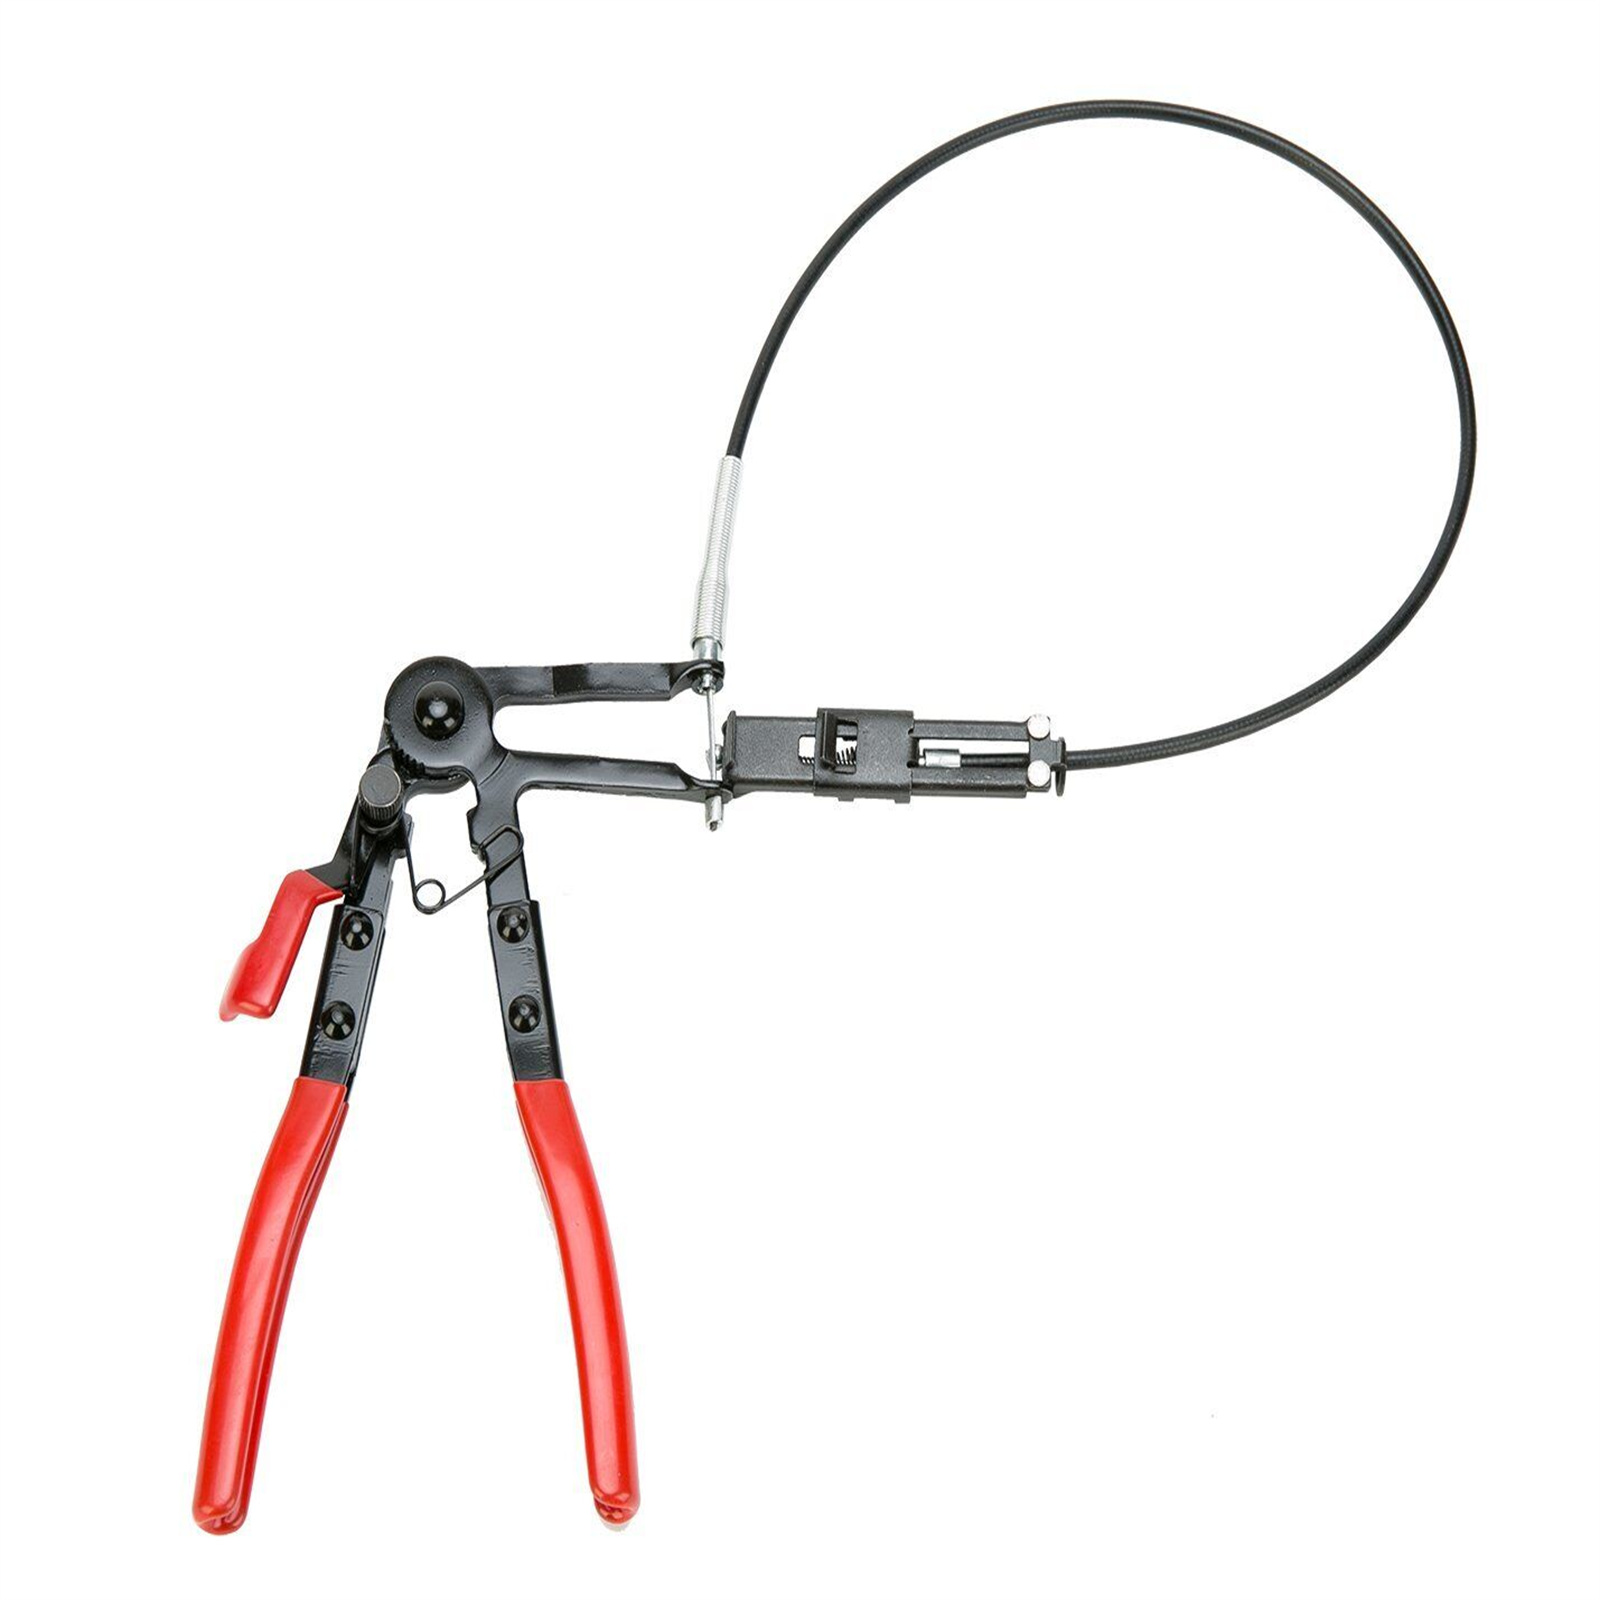 Hose Clamp Pliers Flexible Cable Type Swivel Pincer Clamps Repair Tools For Automotive Radiator Fuel Water